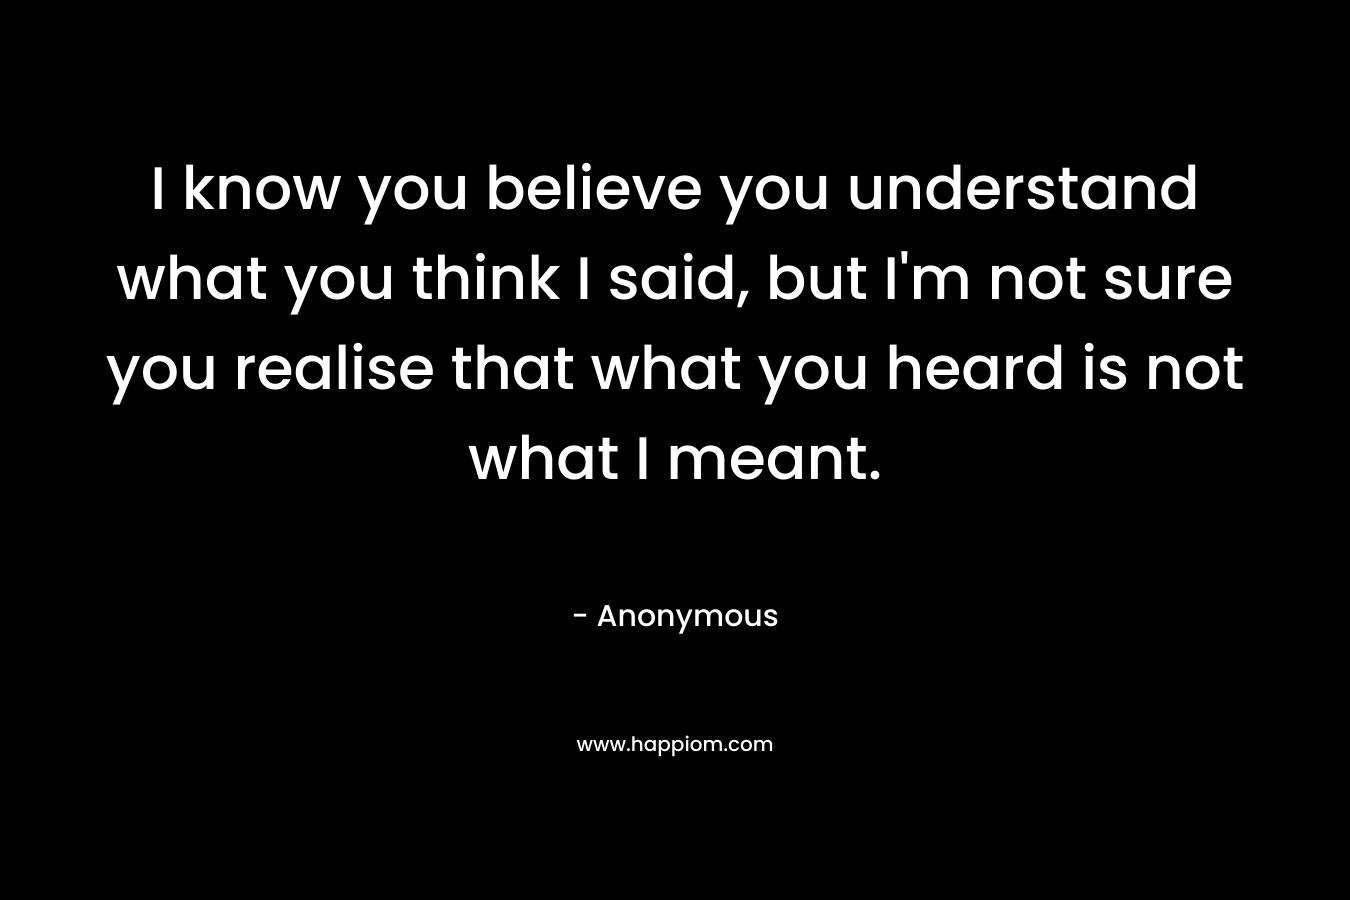 I know you believe you understand what you think I said, but I'm not sure you realise that what you heard is not what I meant.